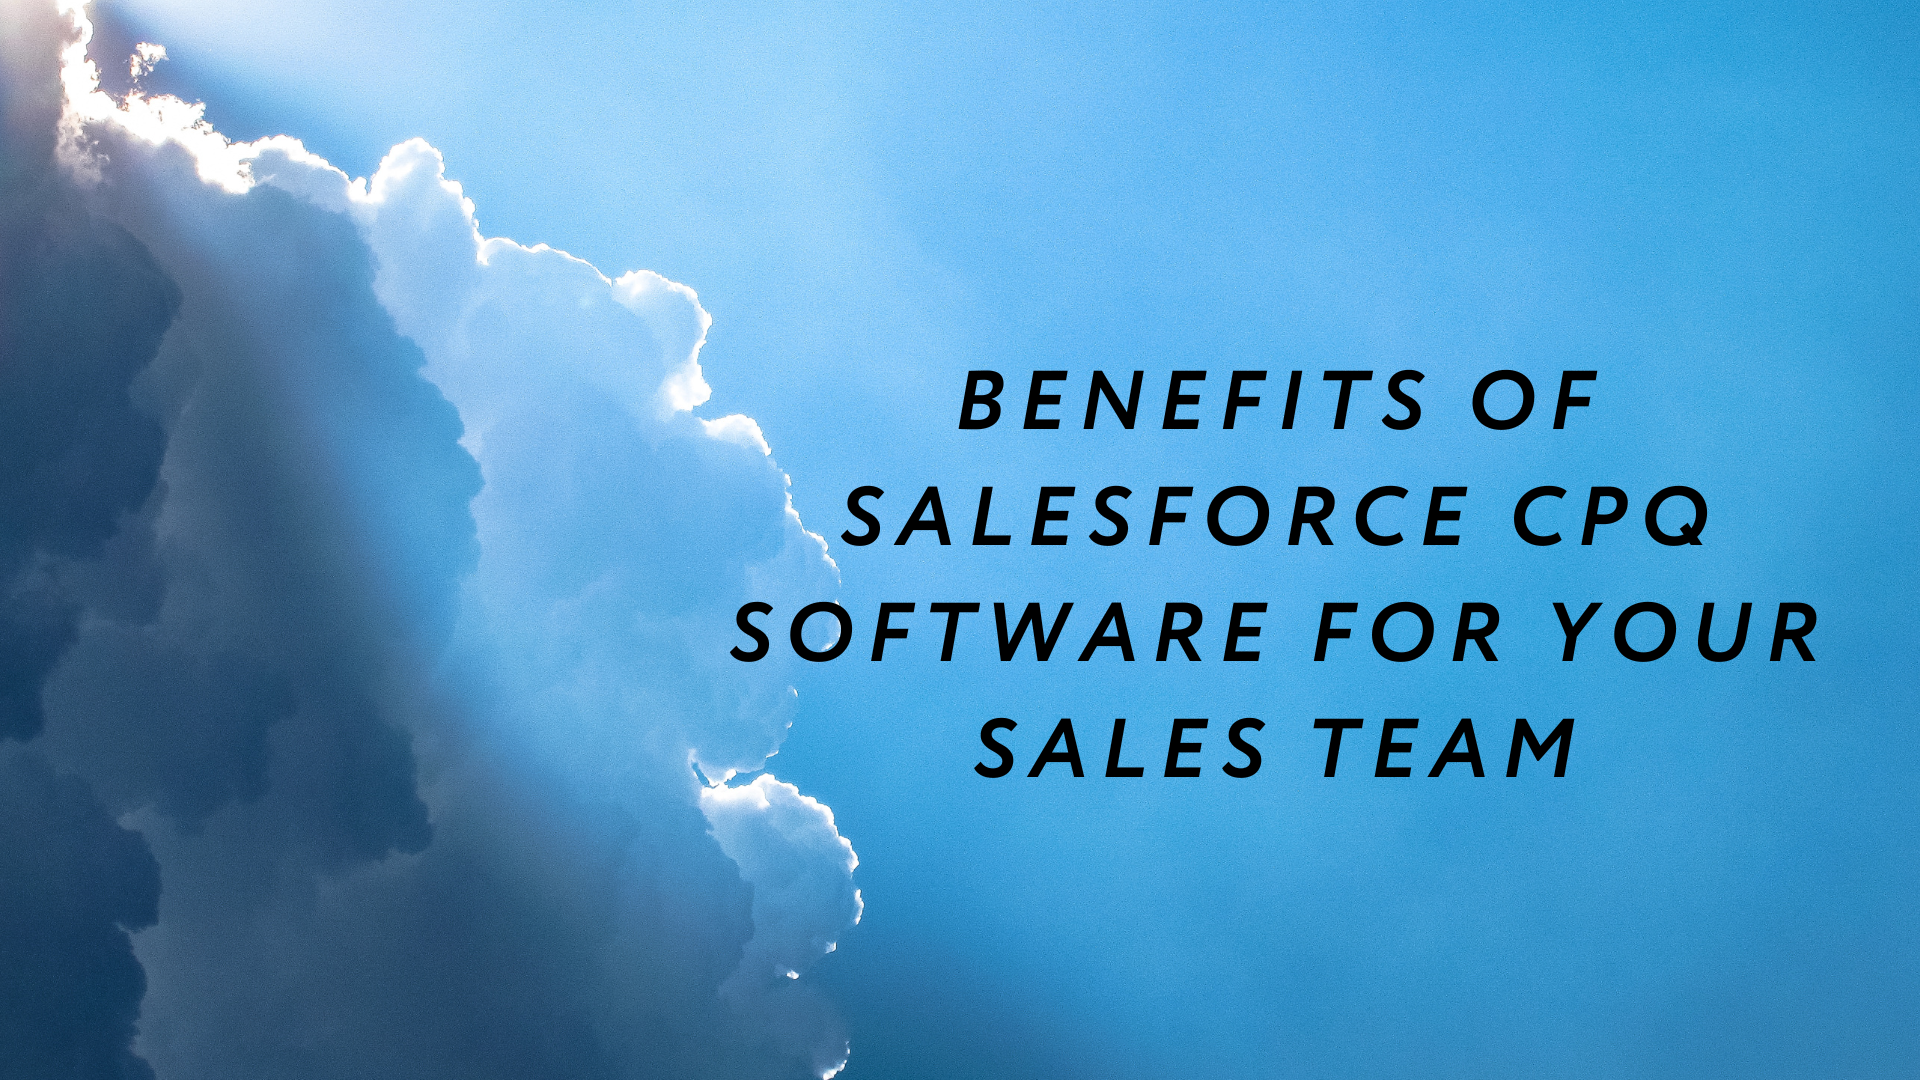 Benefits of Salesforce CPQ Software for Your Sales Team